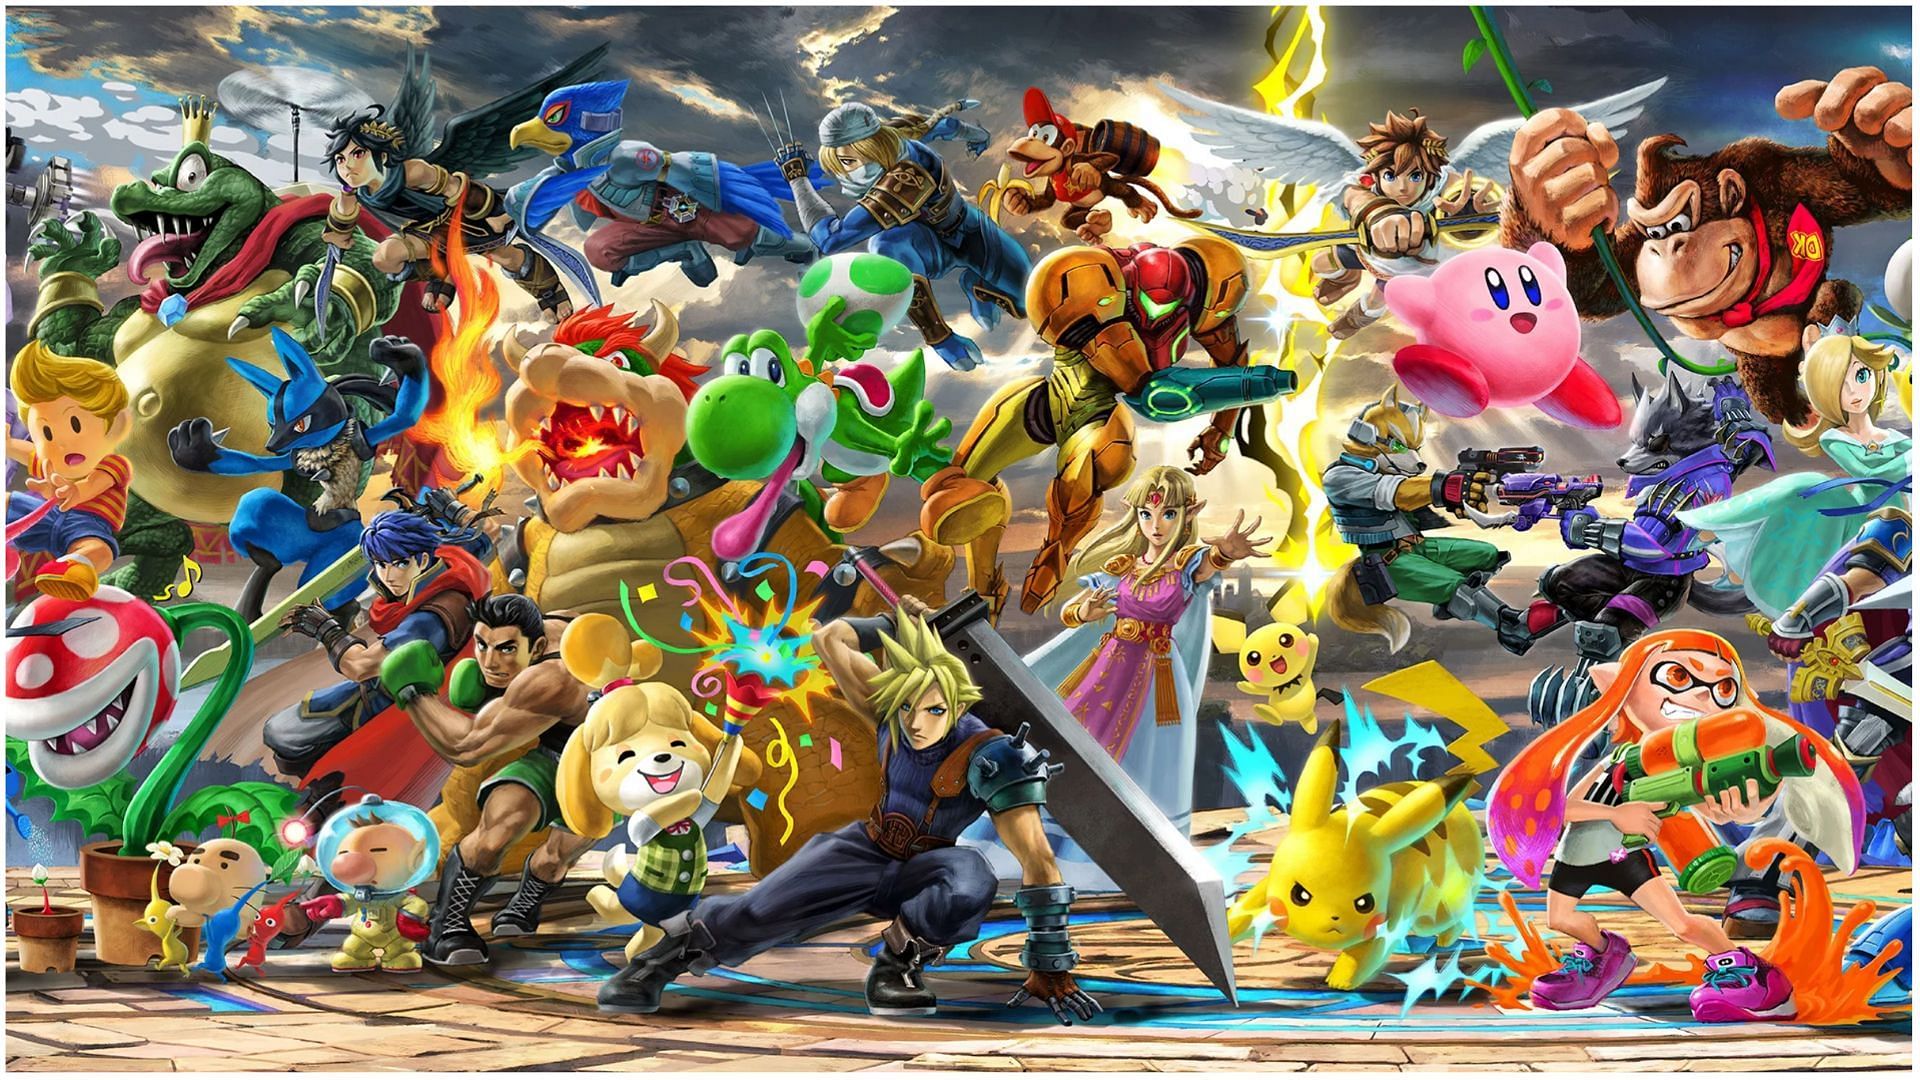 Super Smash Bros. is one of the largest crossover events in video game history (Image via Nintendo)